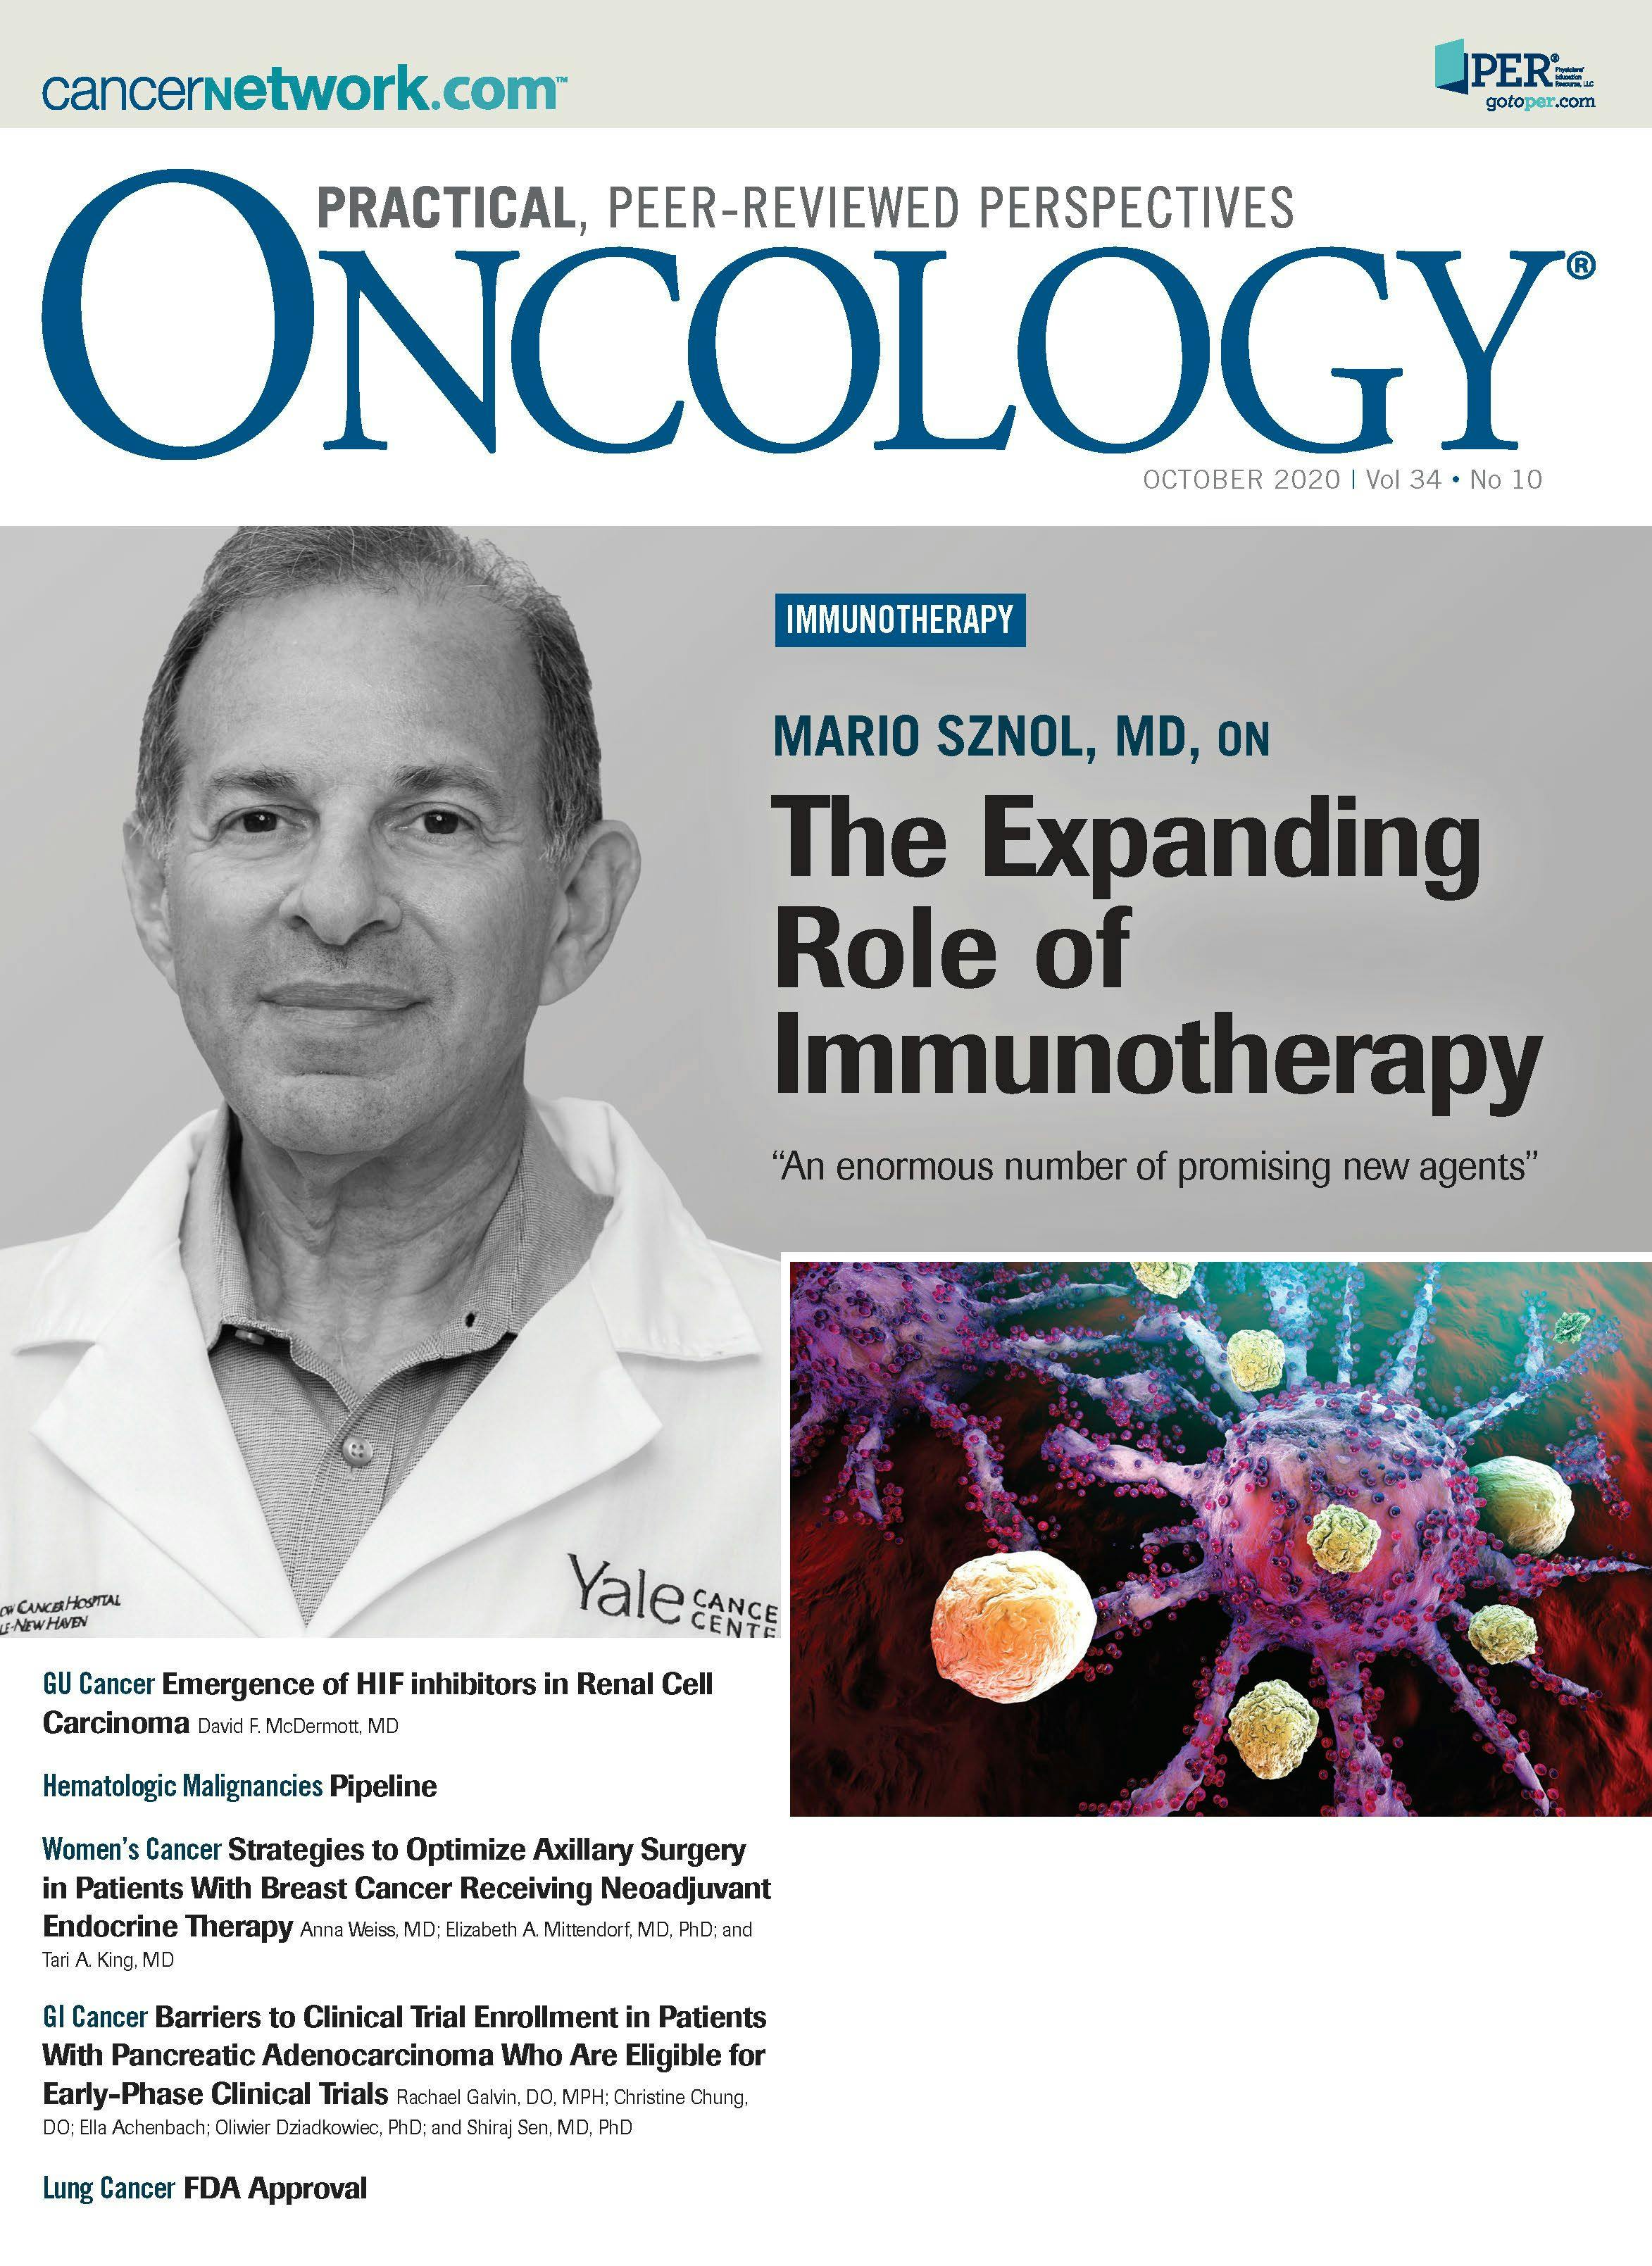 ONCOLOGY Vol 34 Issue 10